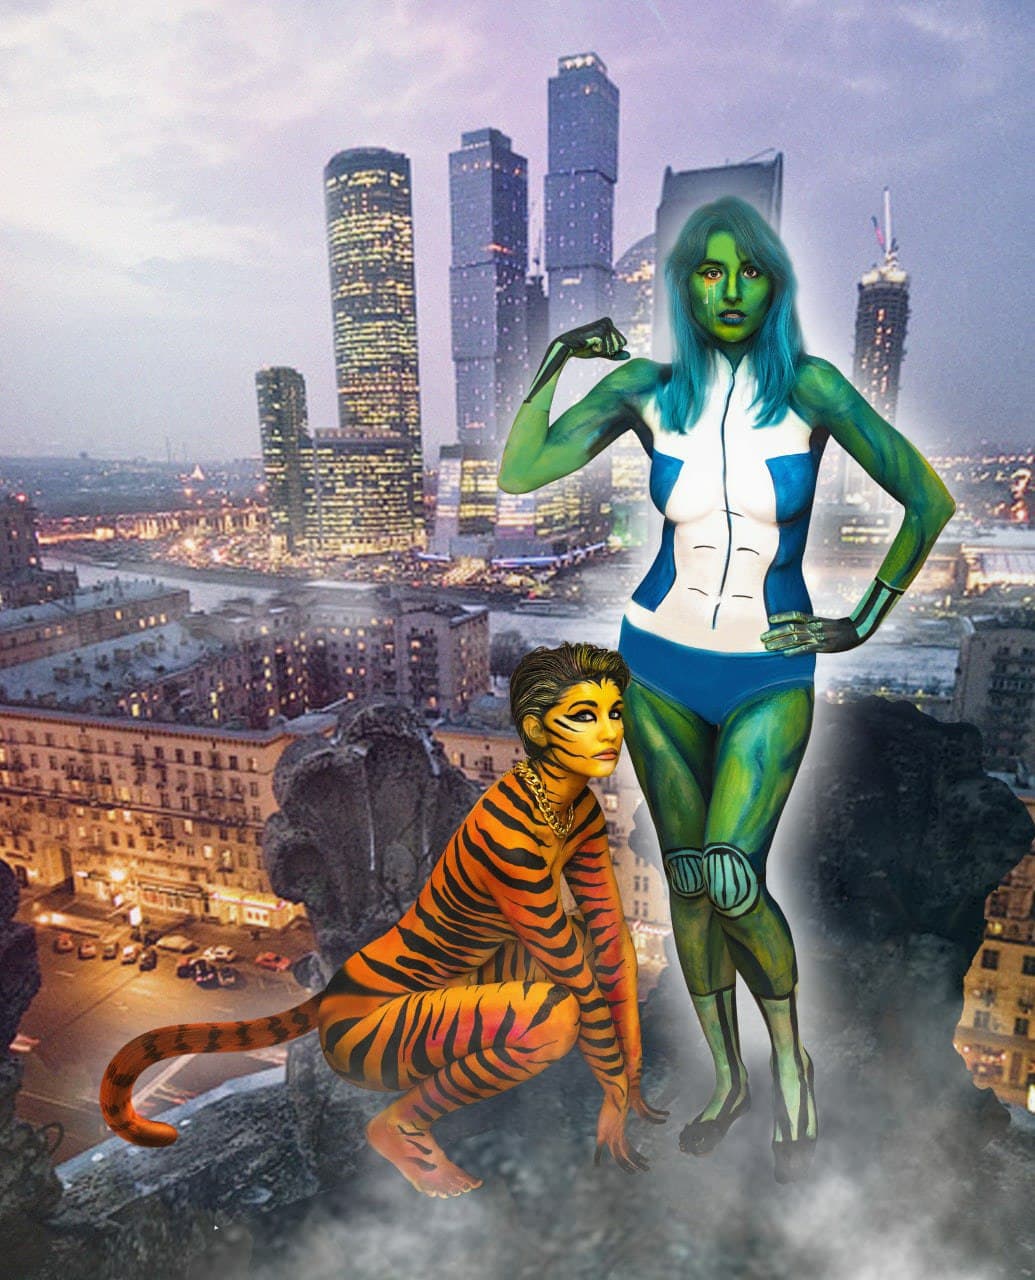 Mythical Beast album, 2021 (with Slezki). In this series of concerts, the group members presented themselves as superheroines and animals